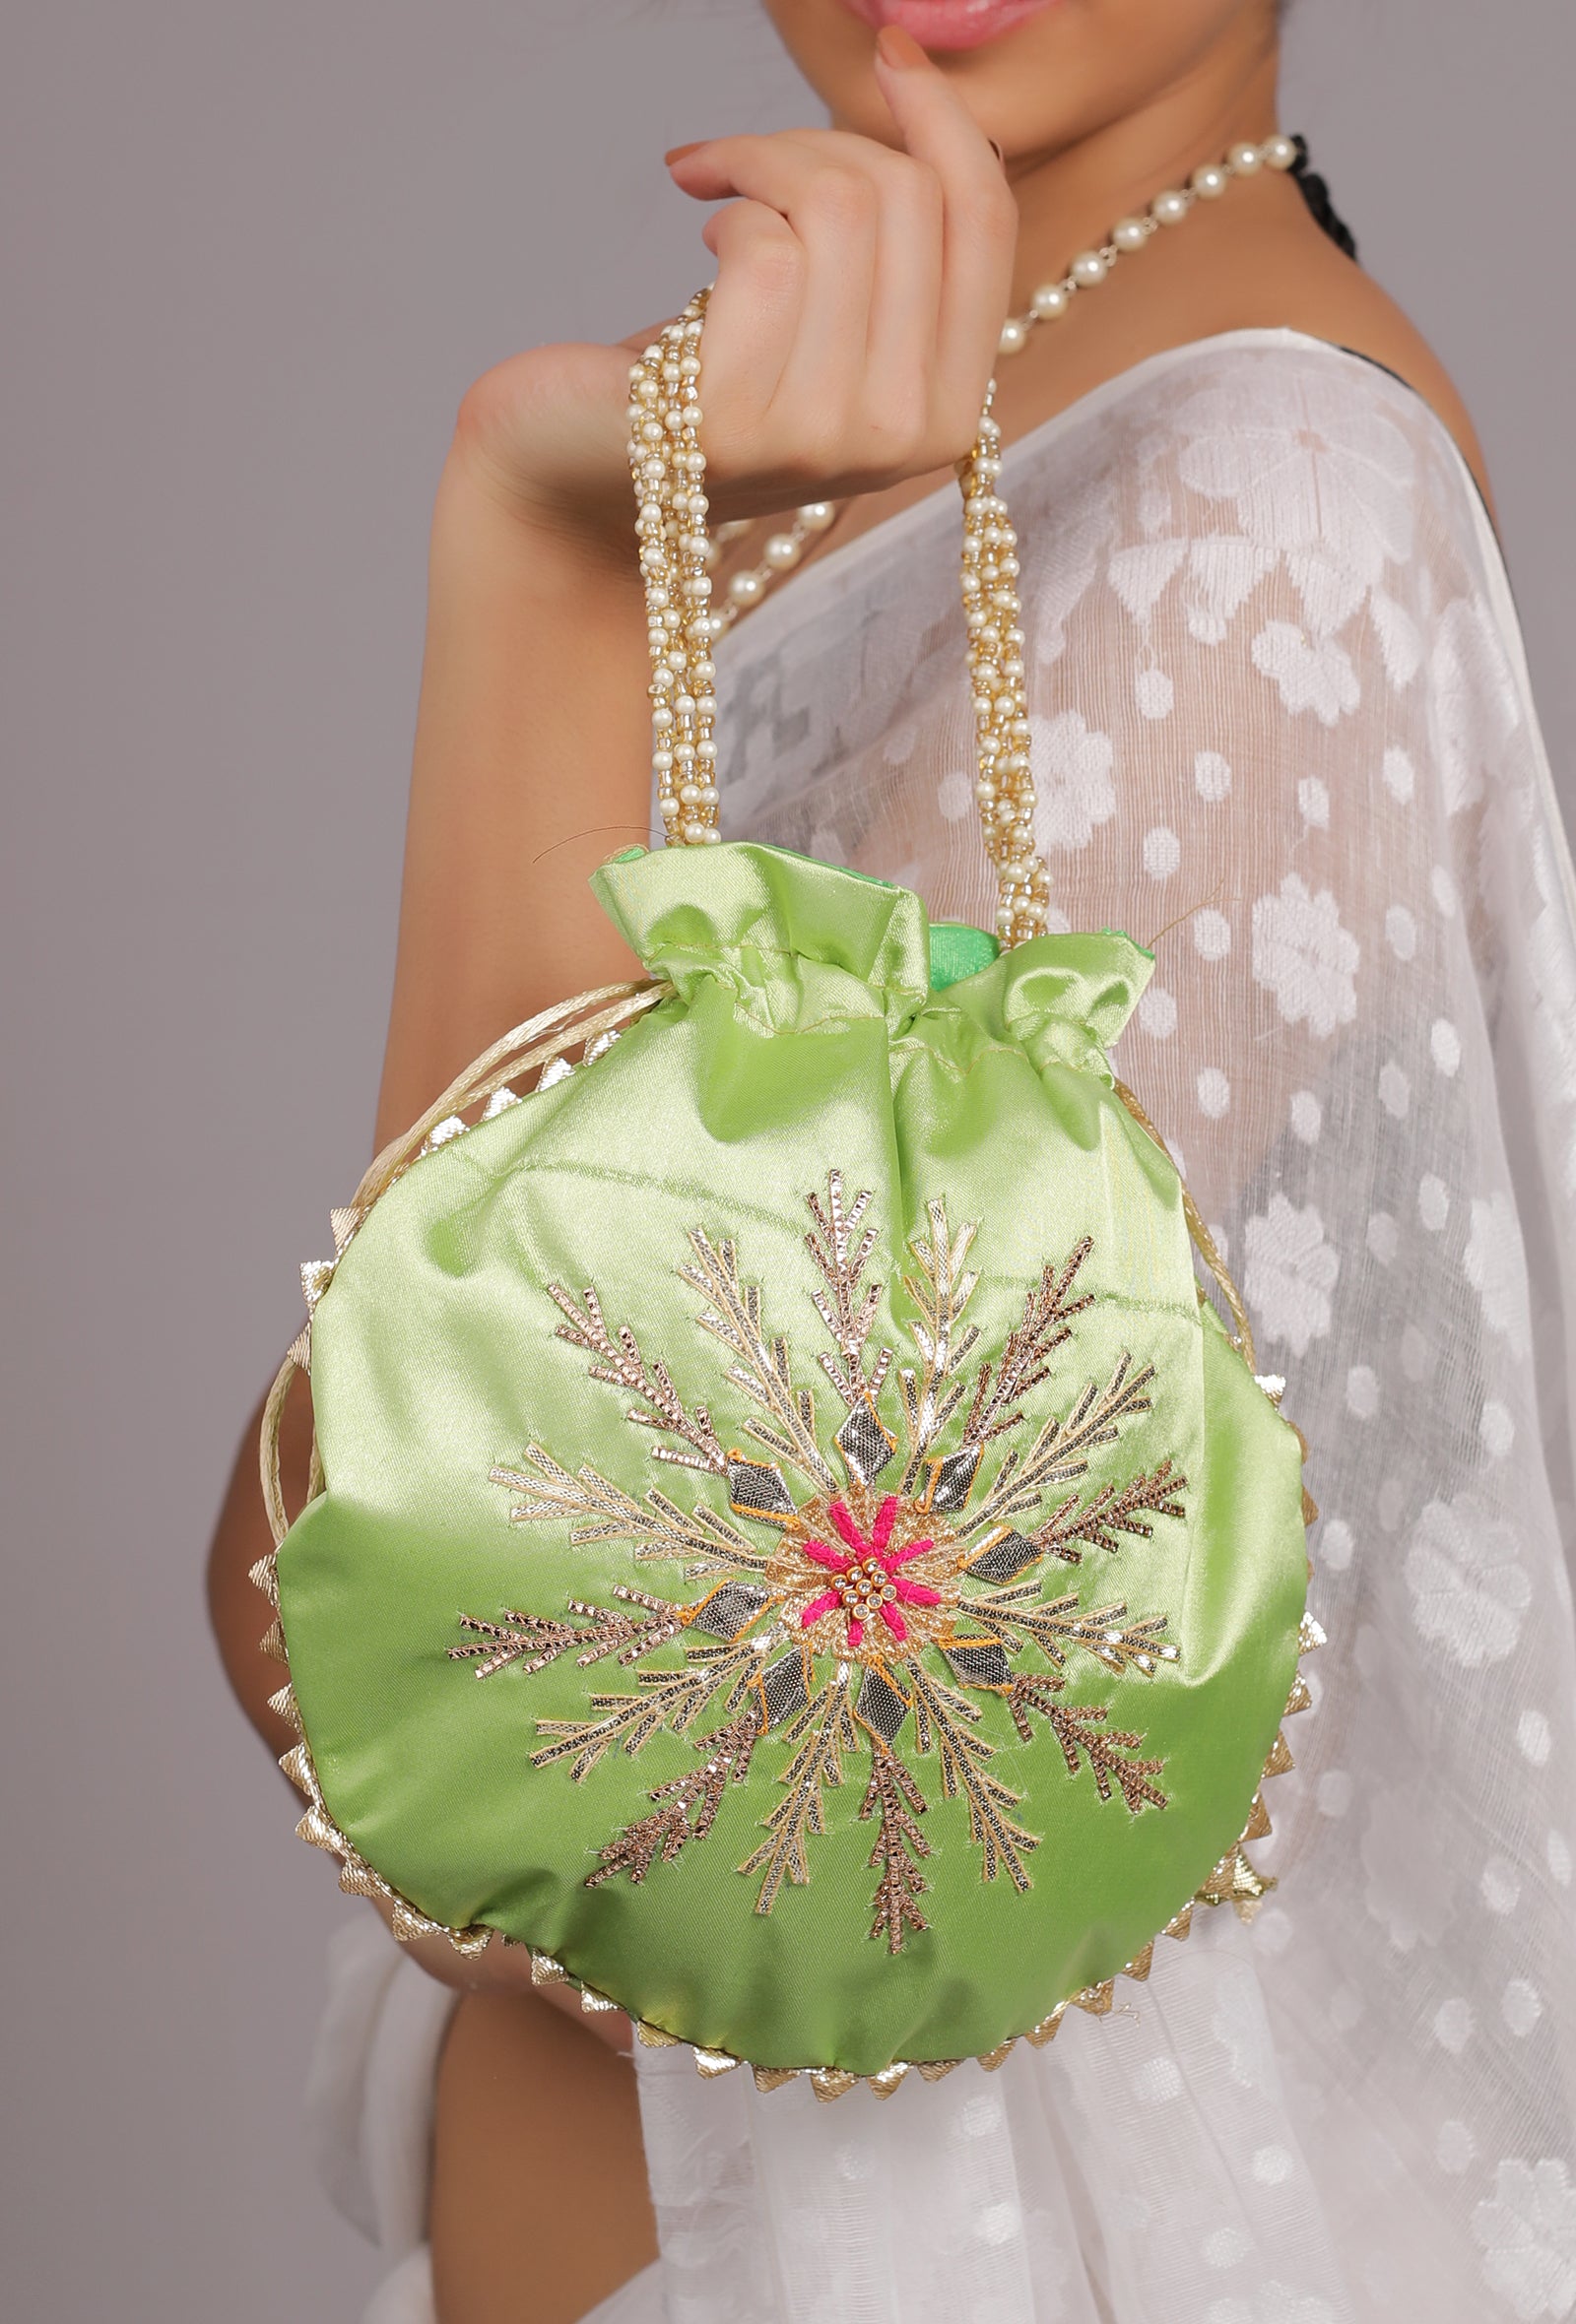 Assorted Embroidered Ladies Hand Bags, For Gifting, Size: 7*9 Inches at Rs  90/piece in Pune